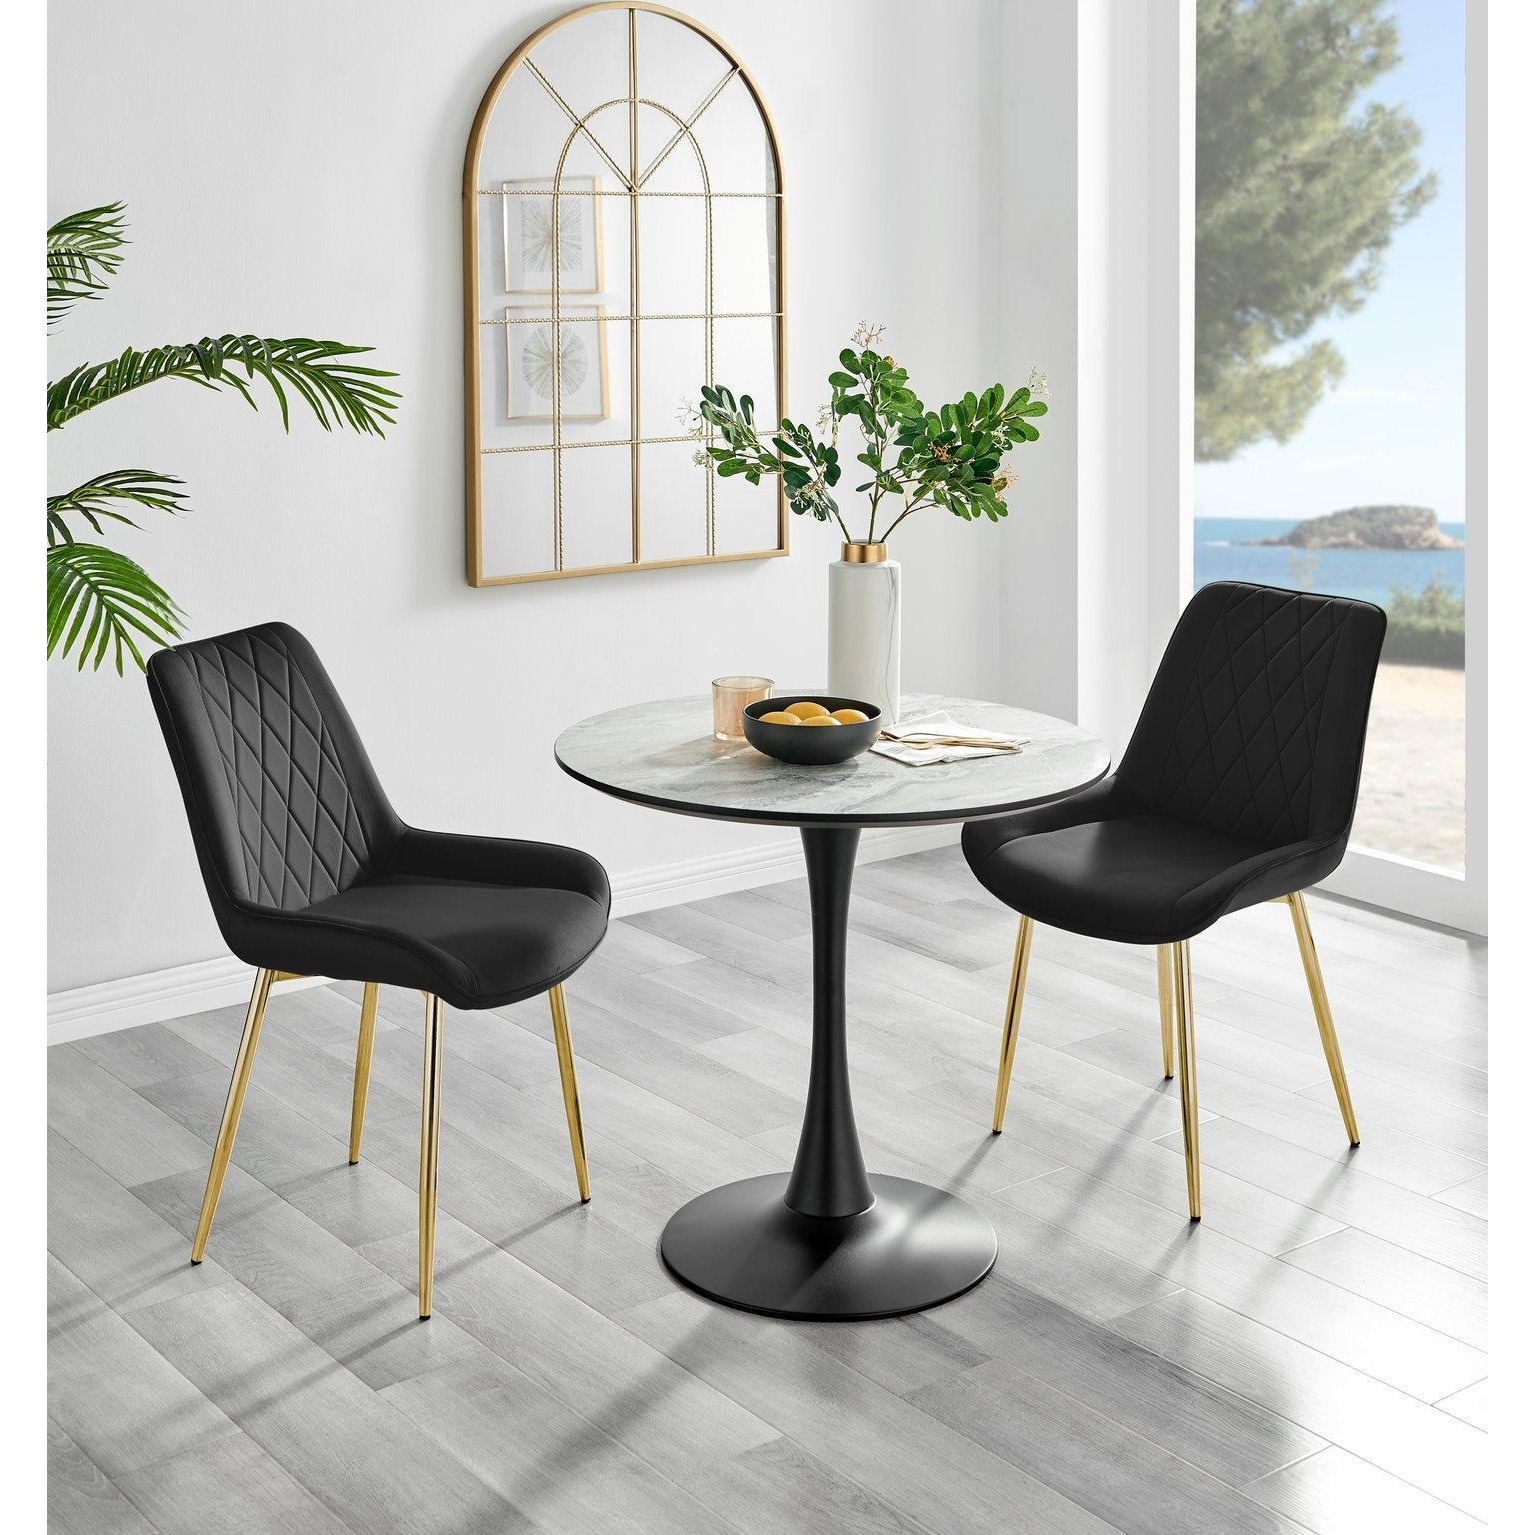 Elina White Marble Effect Scratch Resistant Dining Table & 2 Pesaro Gold Leg Velvet Chairs - image 1